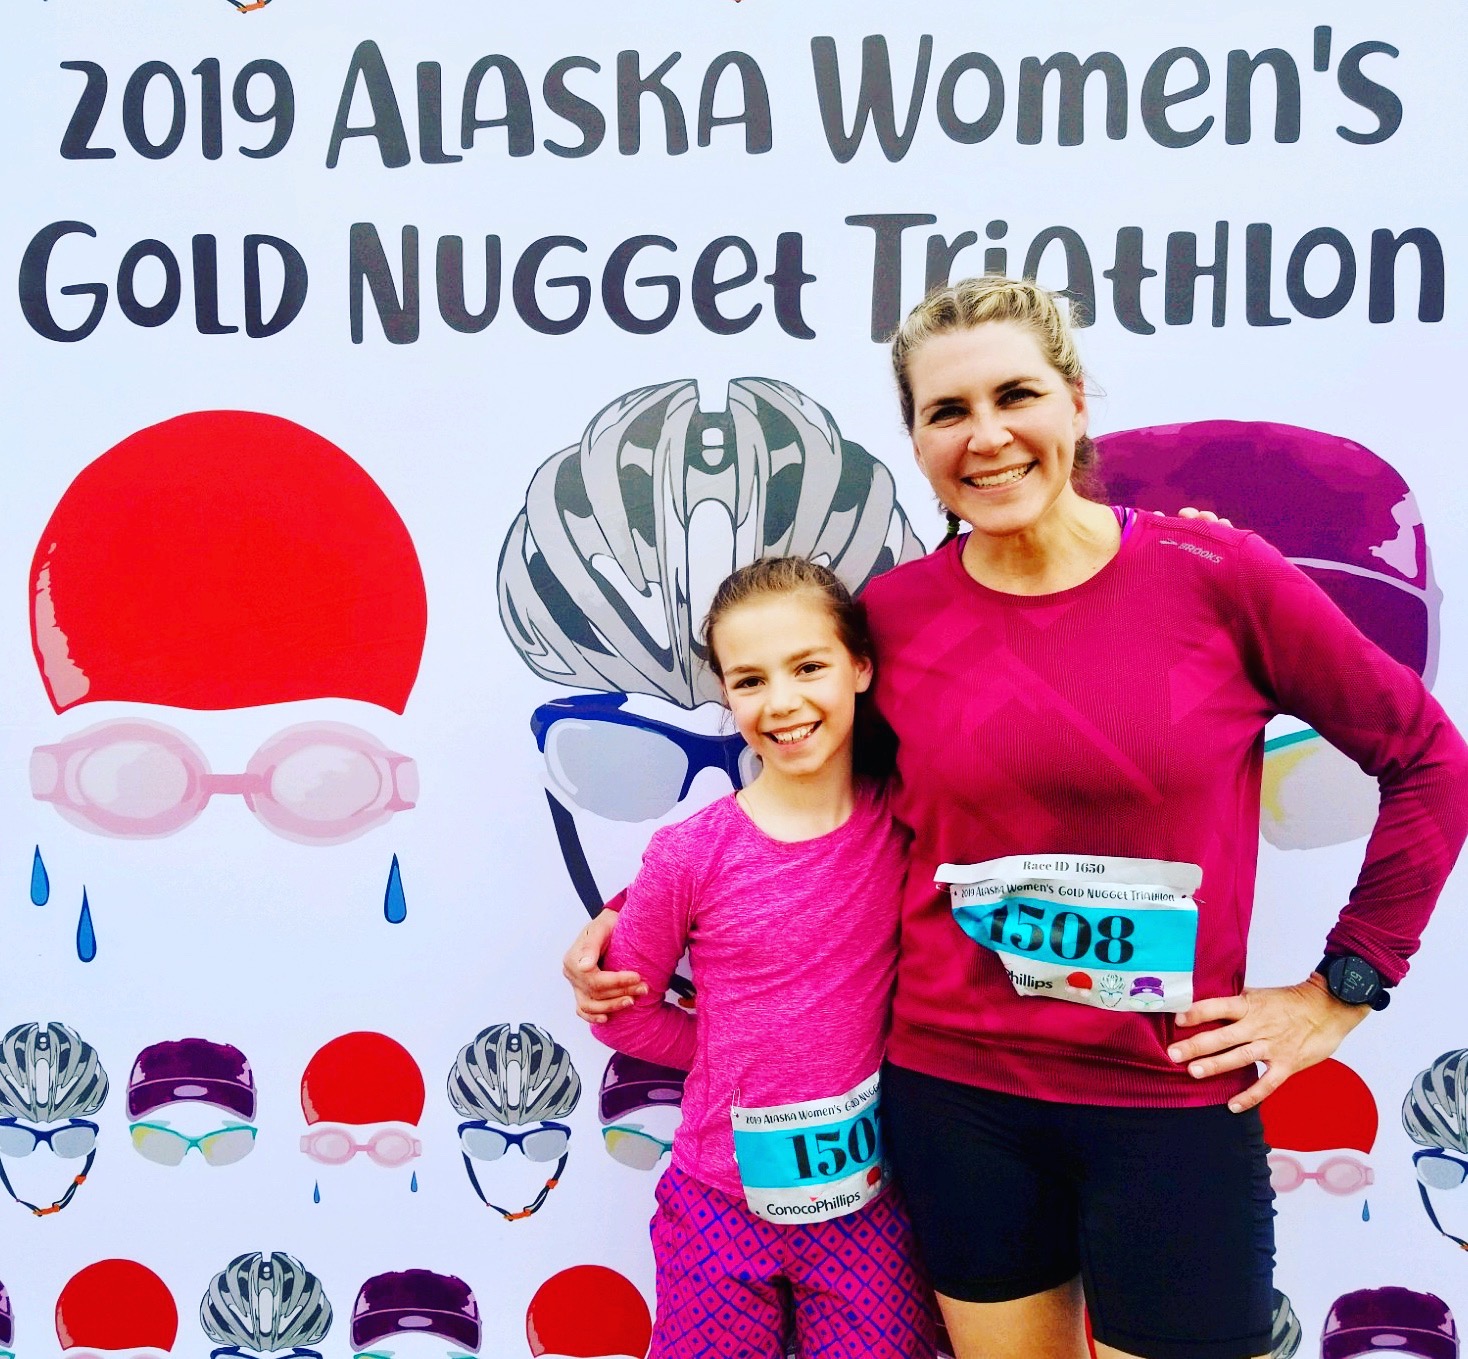 Mom and daughter after competing in The Gold Nugget Triathlon